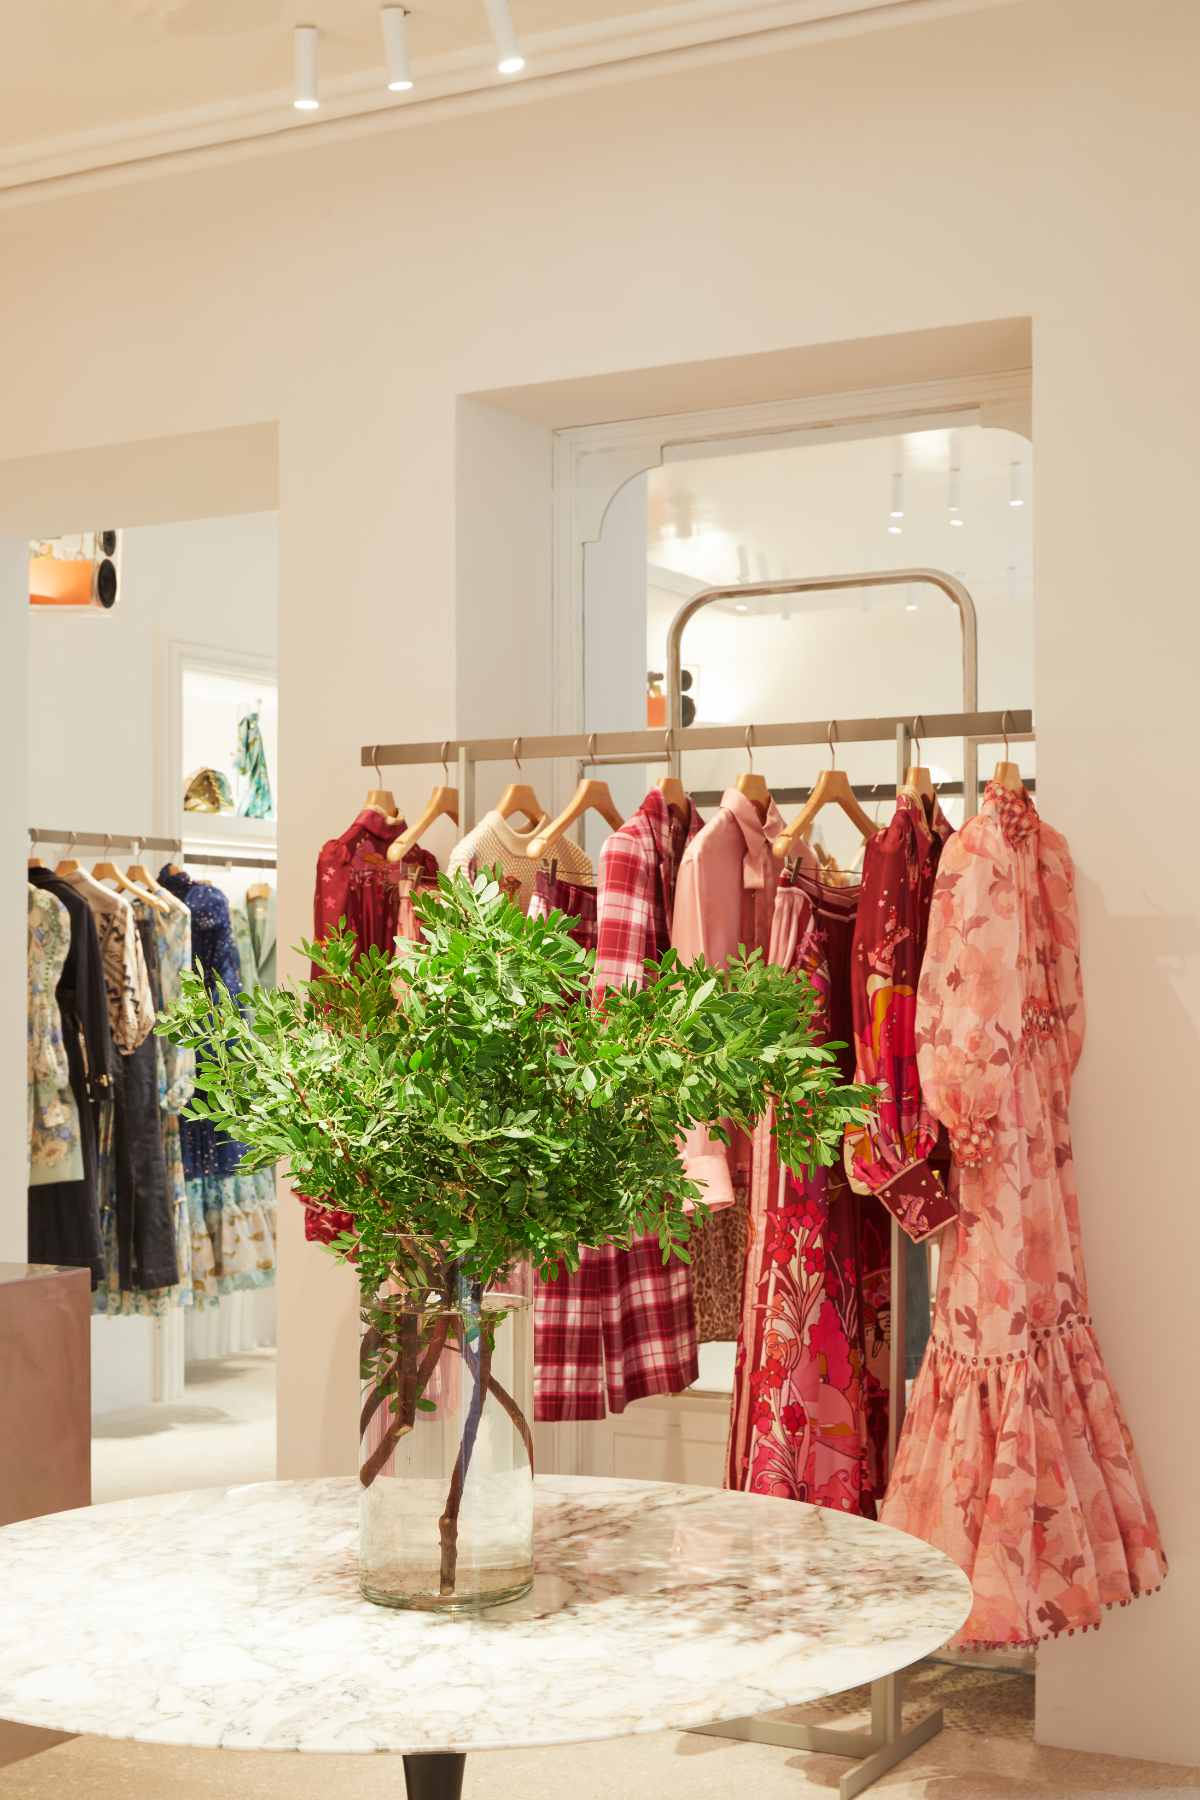 Zimmermann Opened A New Store In Rome